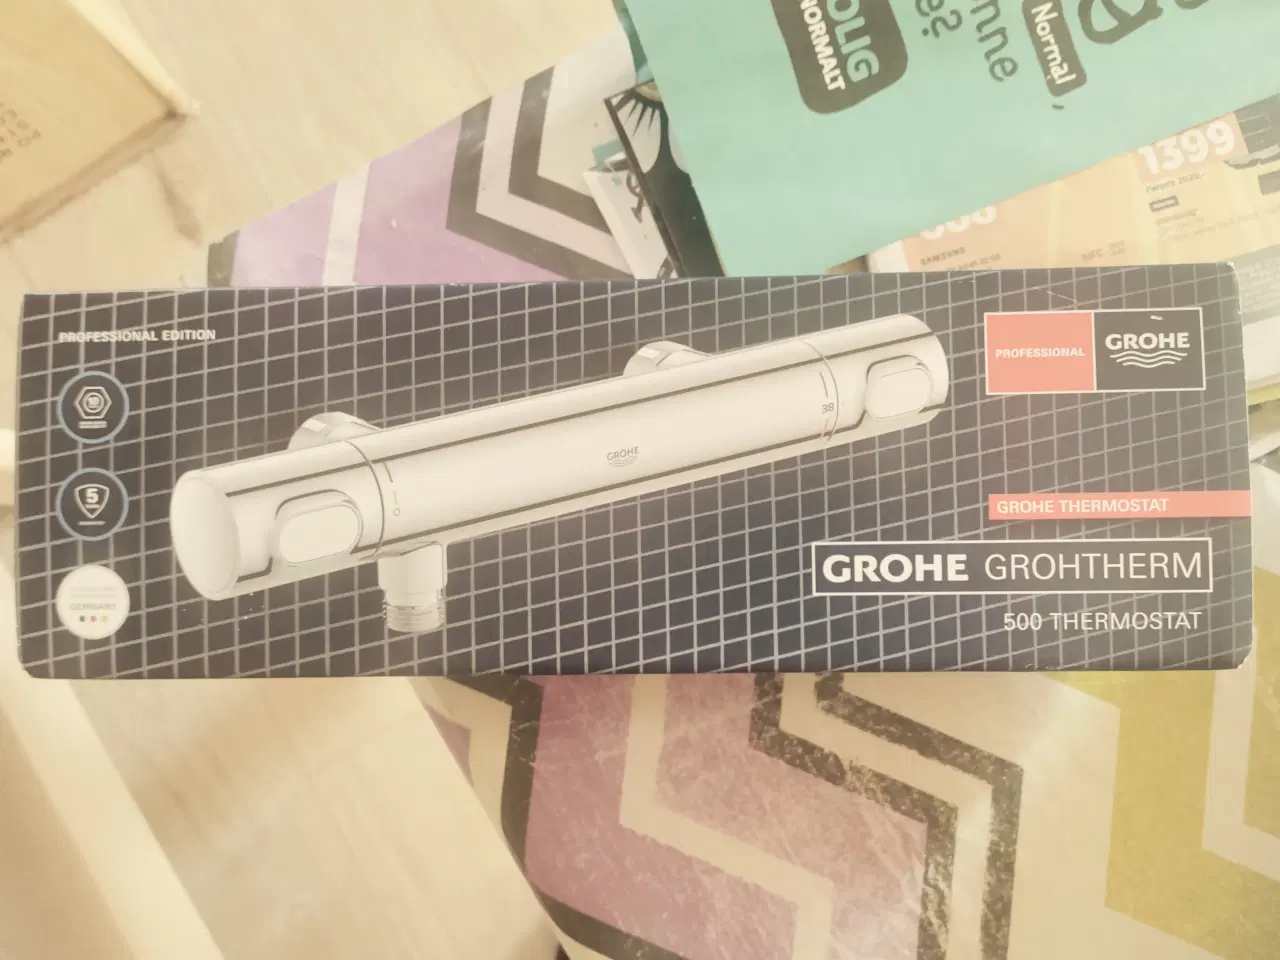 Billede 4 - Grohe grohtherm